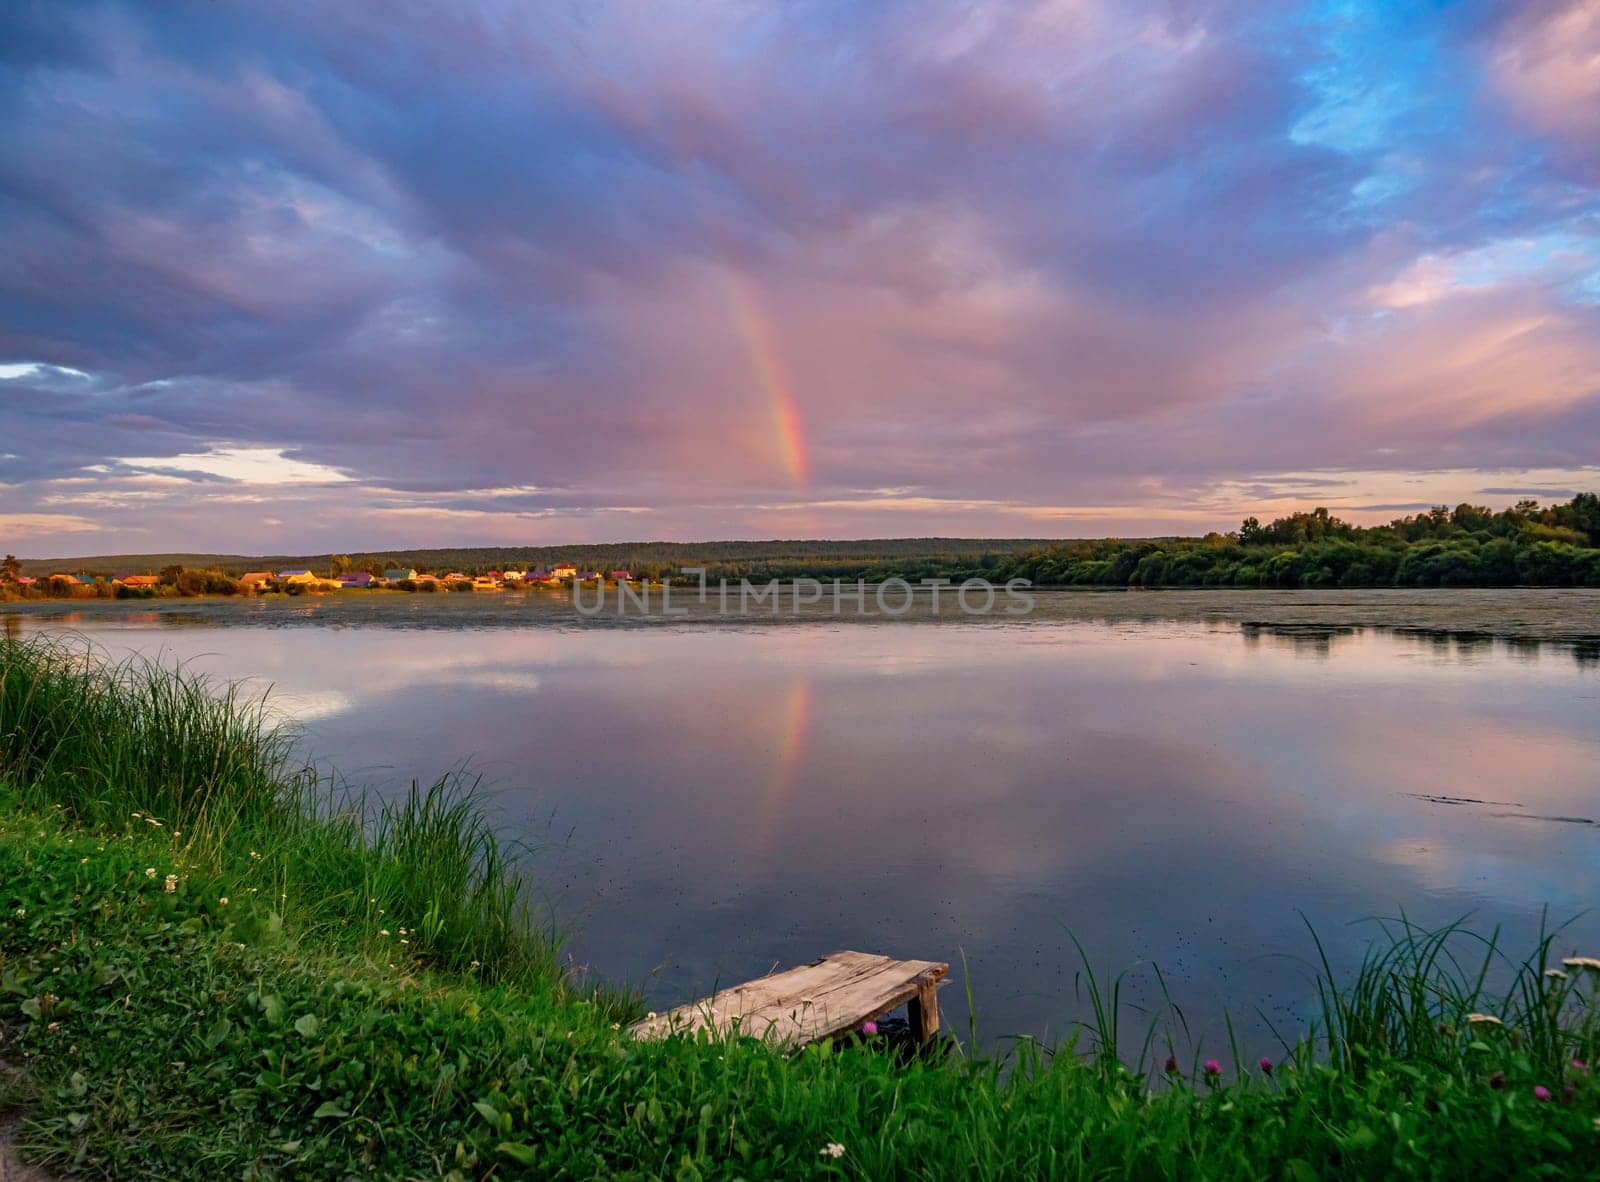 Beautiful pink sunset with rainbow reflection over calm lake at countryside evening. Tranquil lake with a wooden dock in the foreground. by Busker